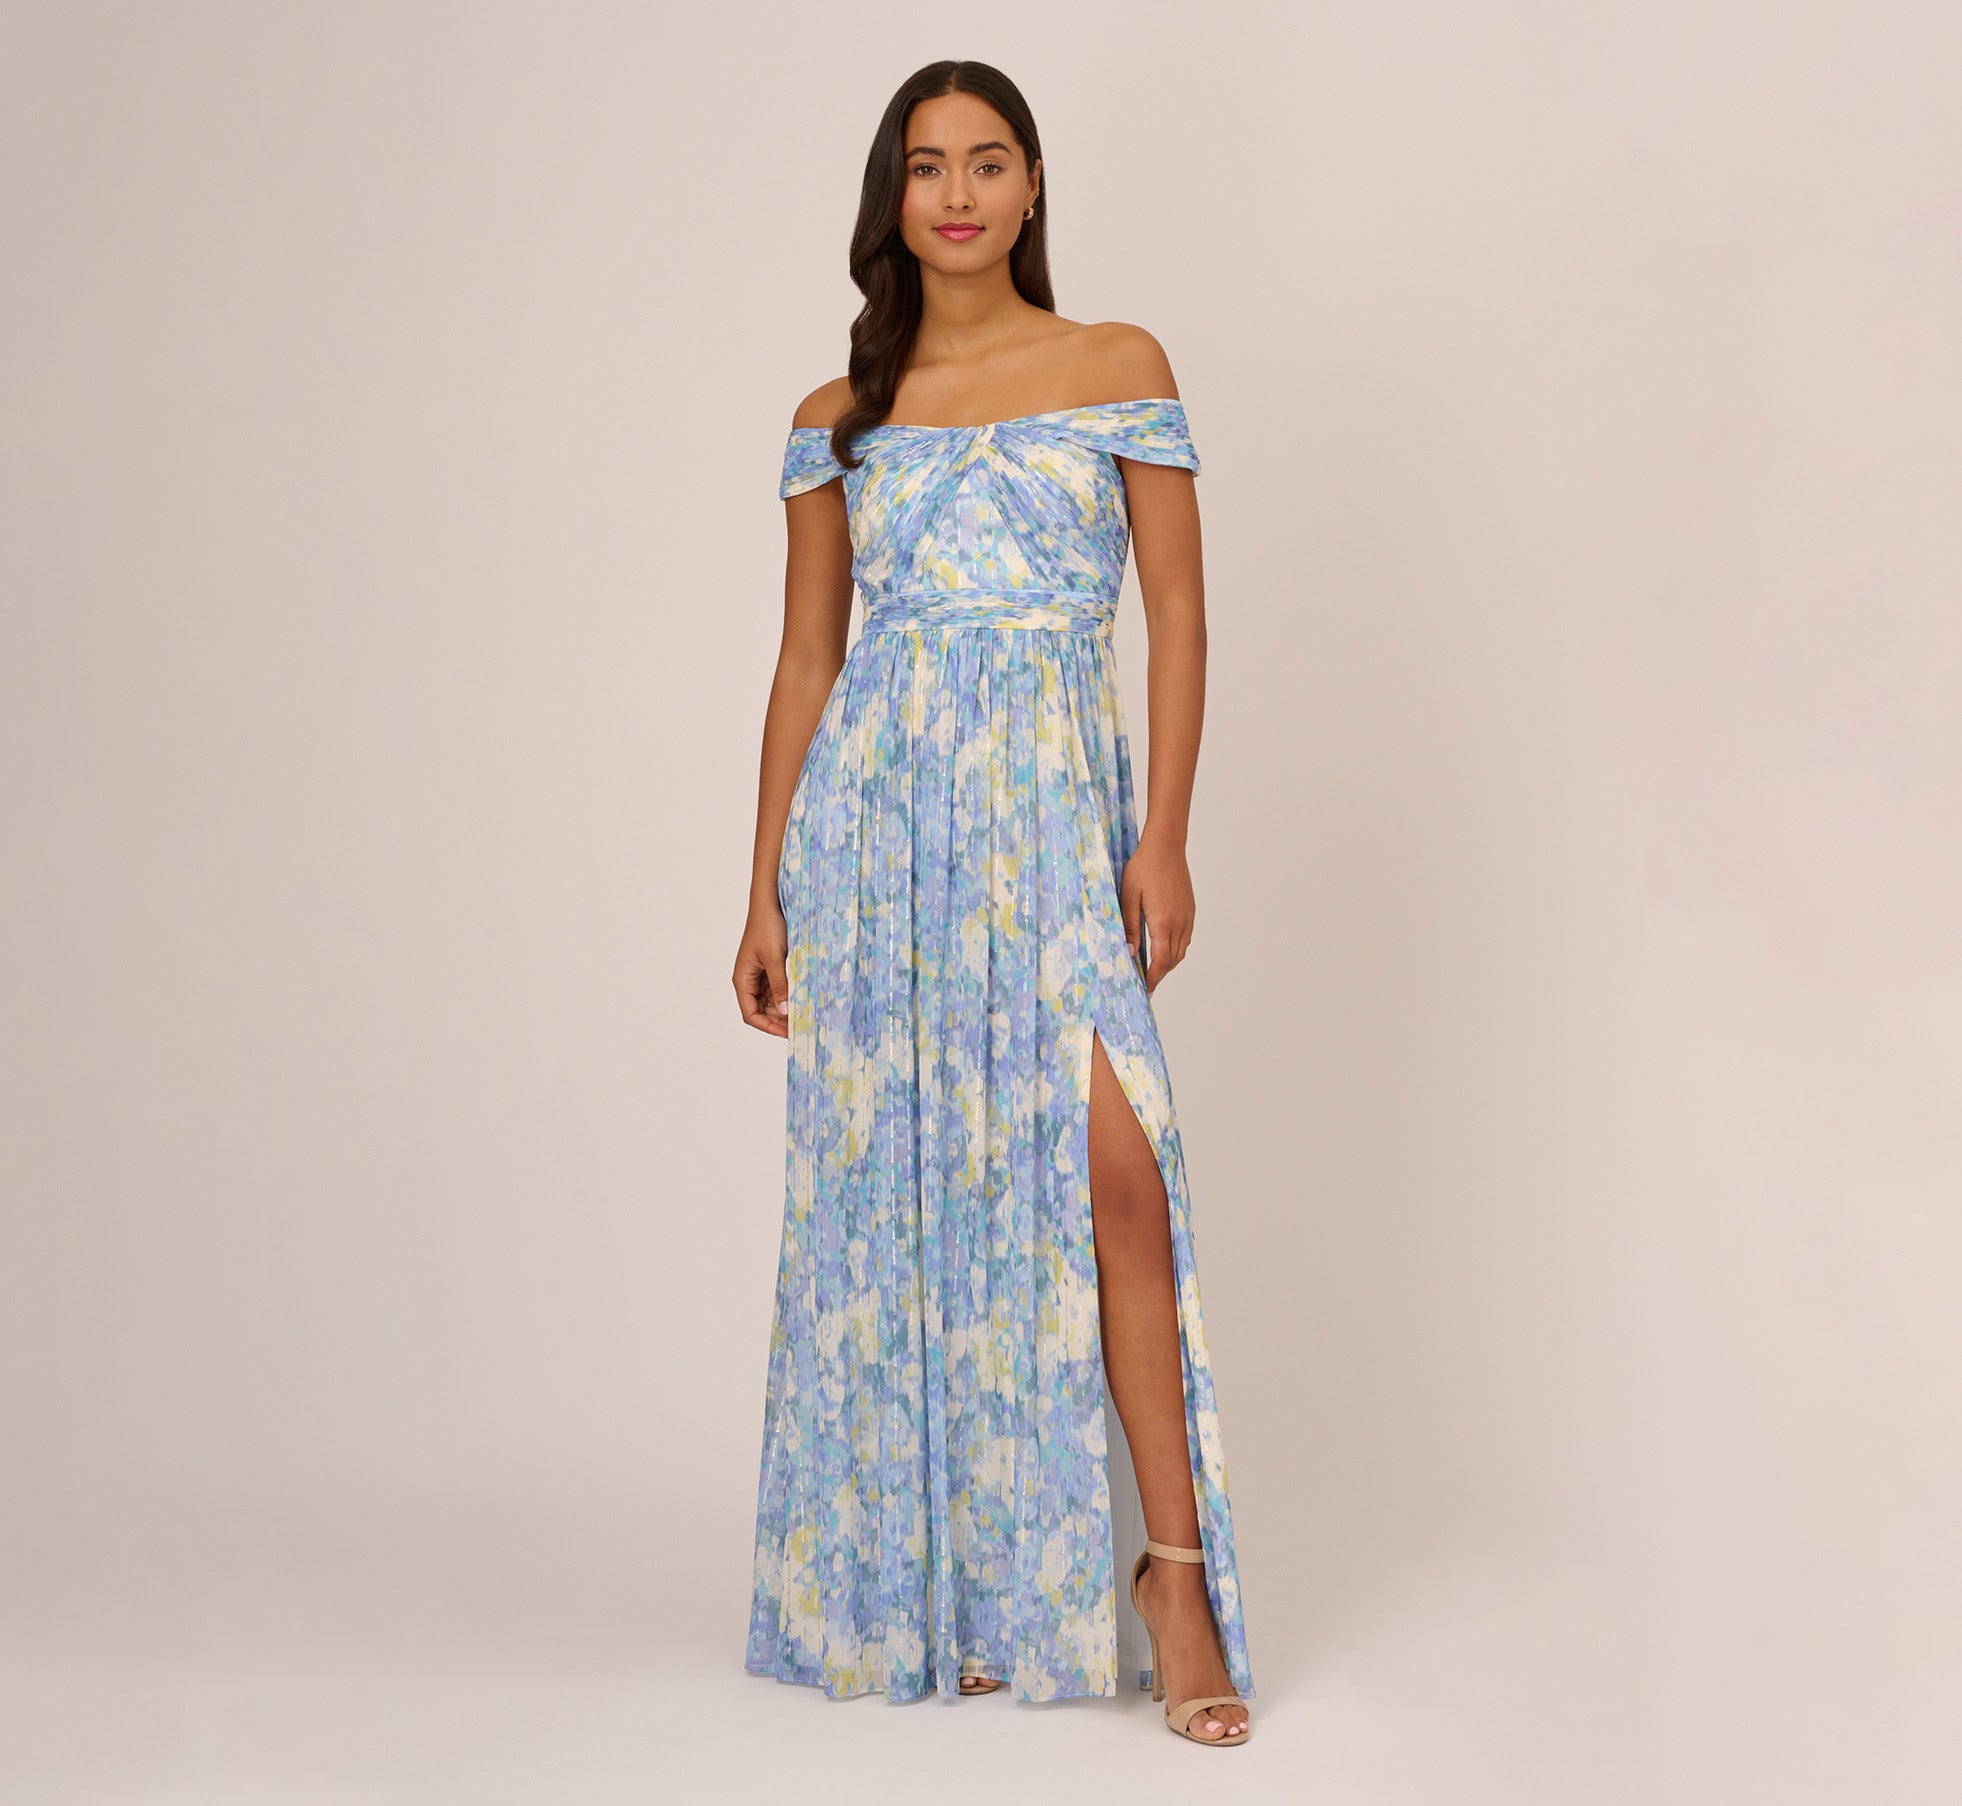 Floral-Printed Satin and Lace Two-Piece Dress | David's Bridal